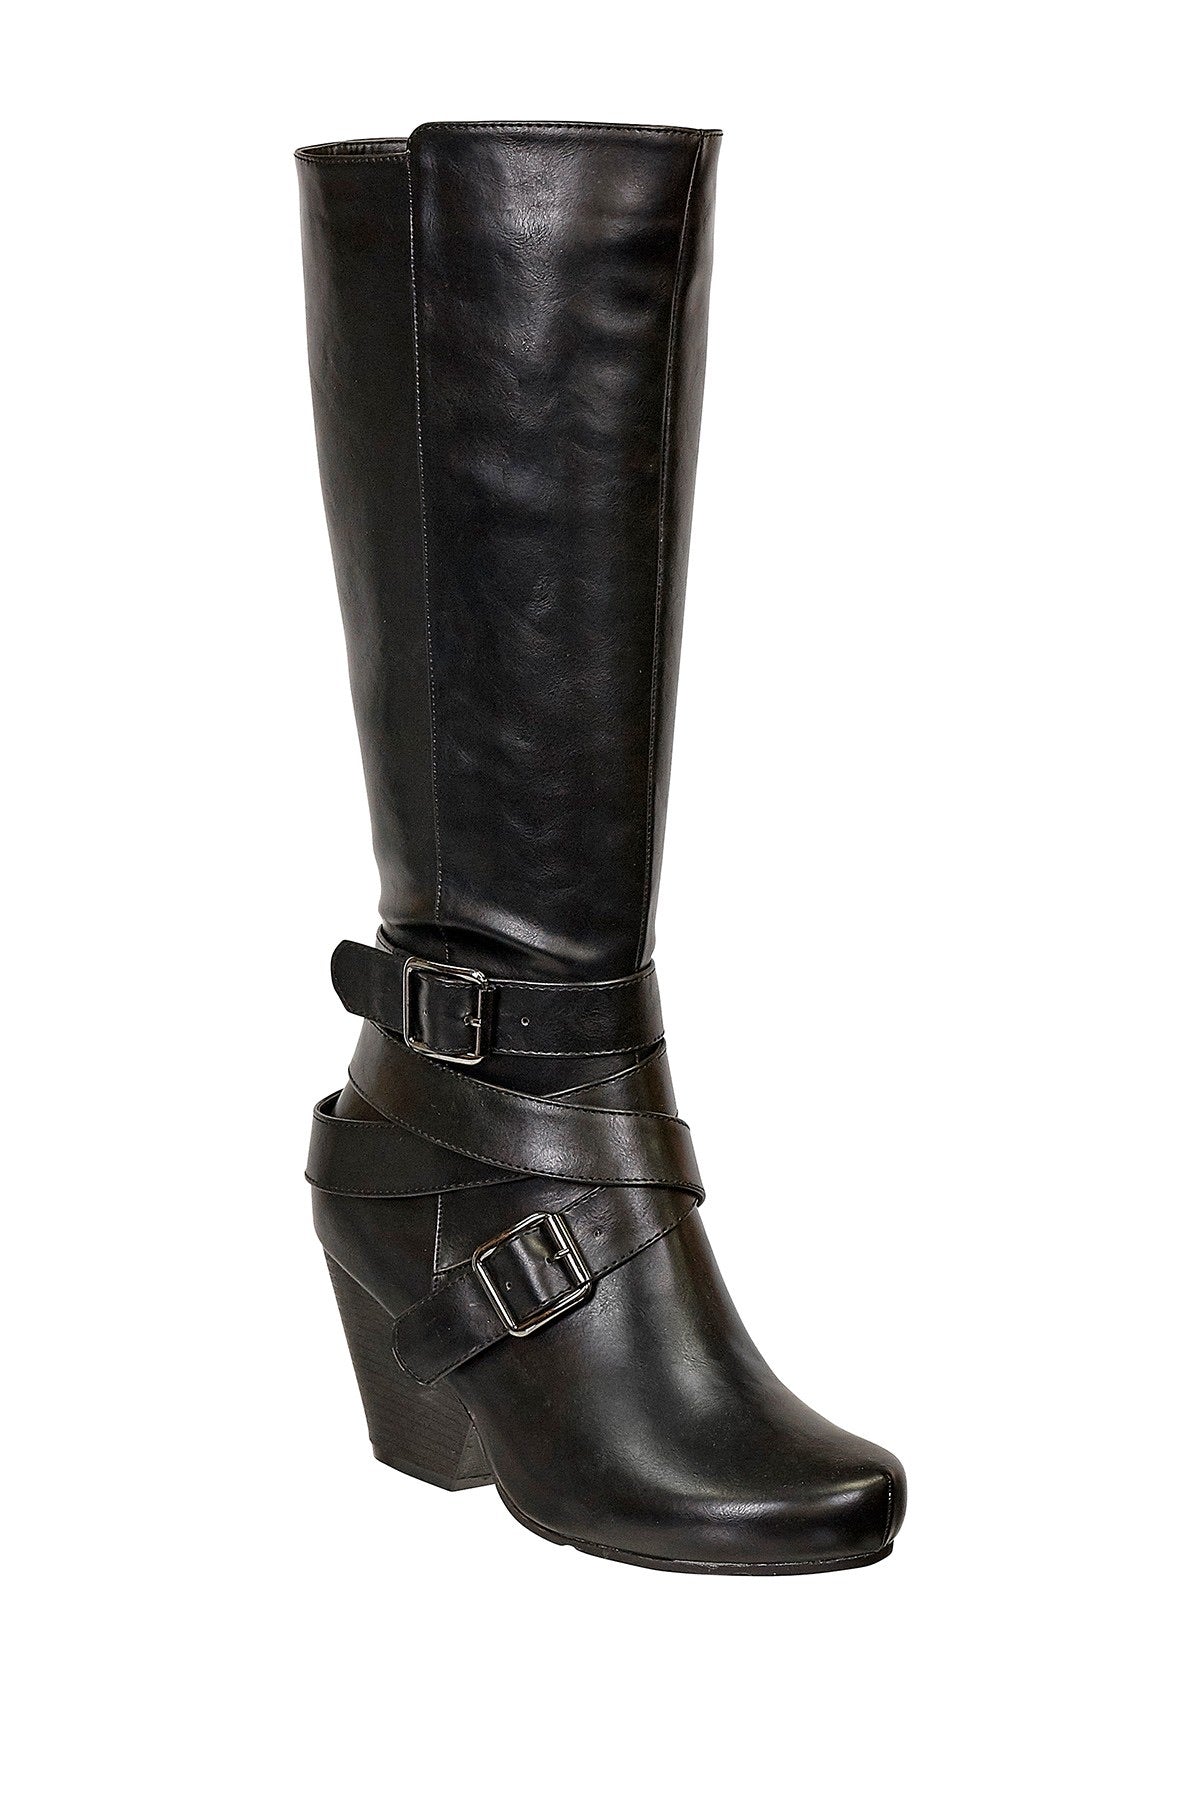 * The Beverly Black Boot